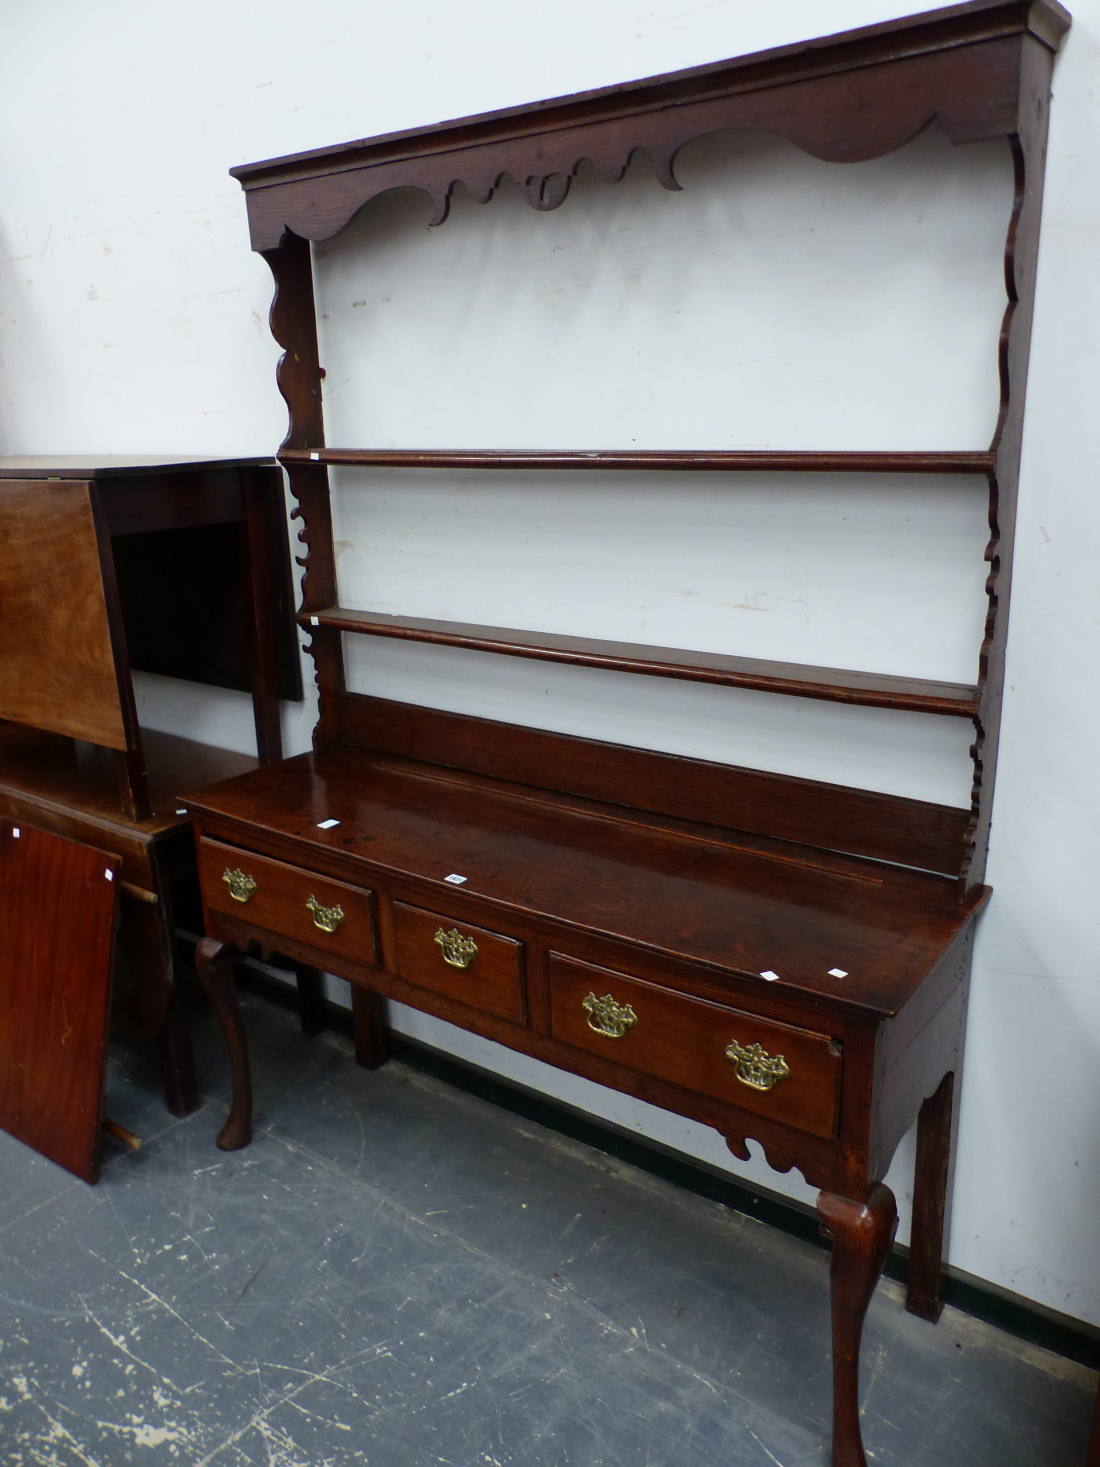 AN 18th C. AND LATER OAK DRESSER, THE OPEN TWO SHELF BACK RECESSED ABOVE THE THREE DRAWER BASE ON - Image 3 of 3